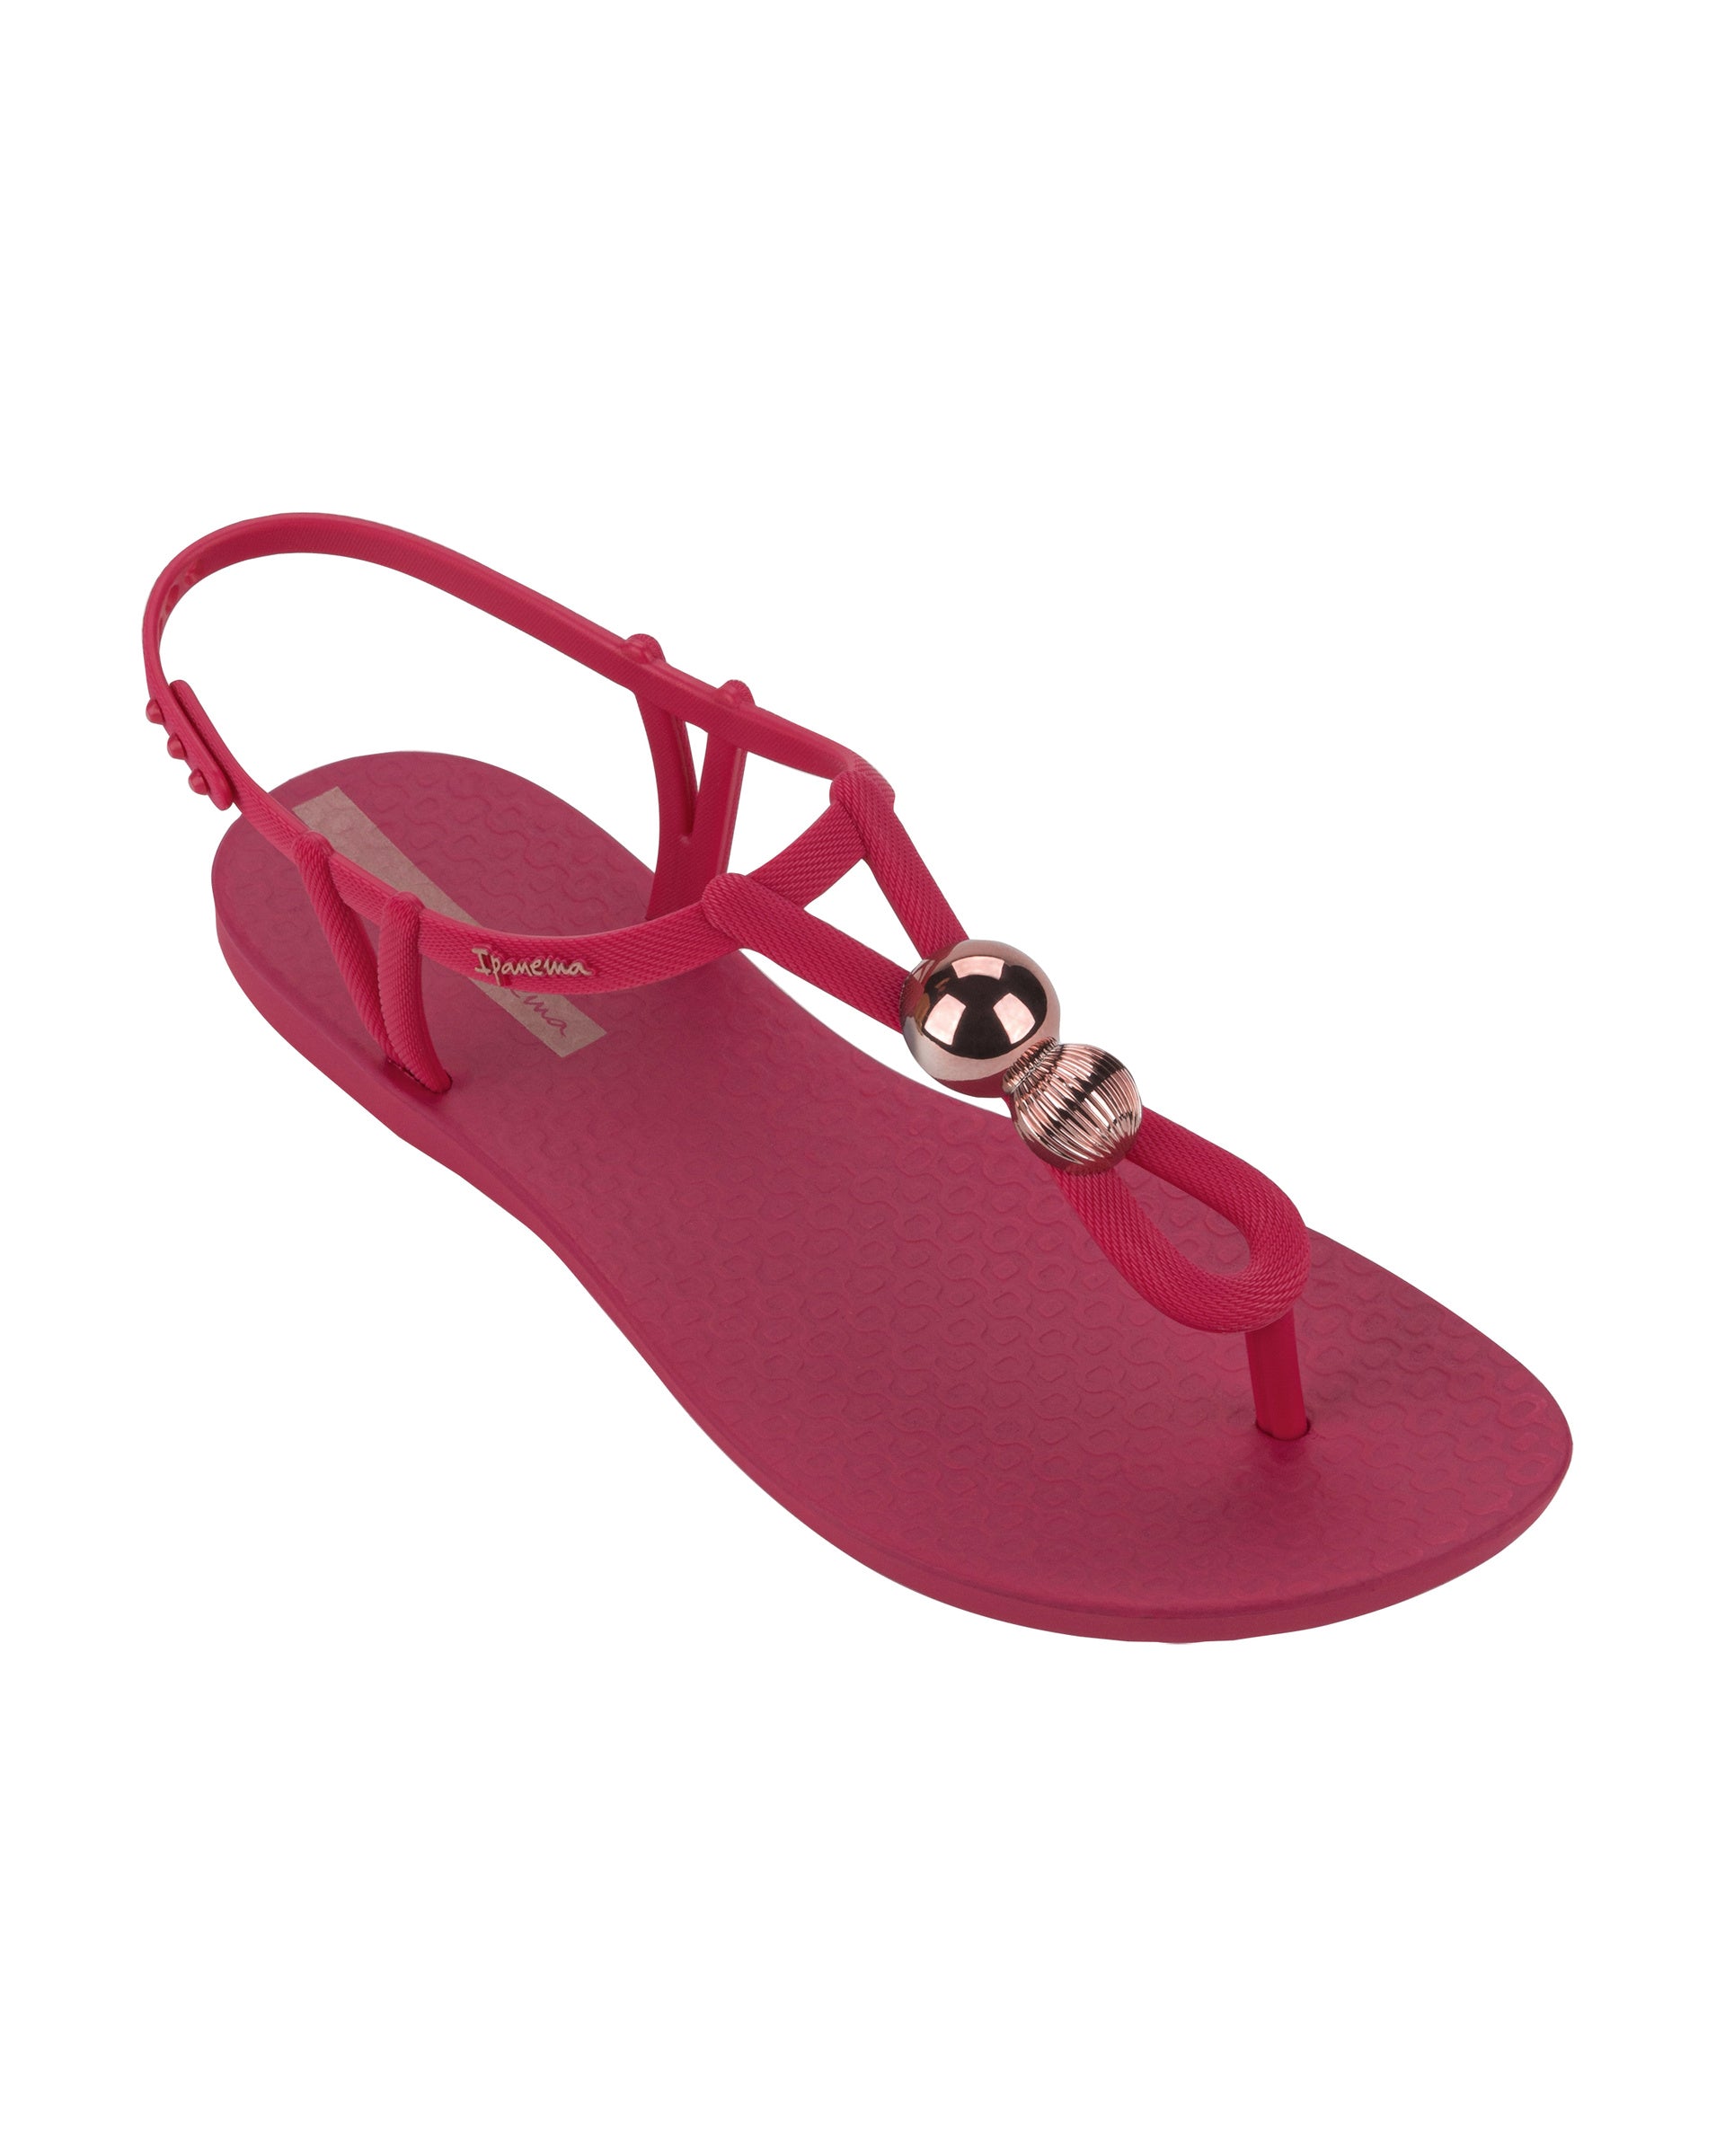 Angled view of a pink Ipanema Class Spheres women's t-strap sandal with metallic bauble.